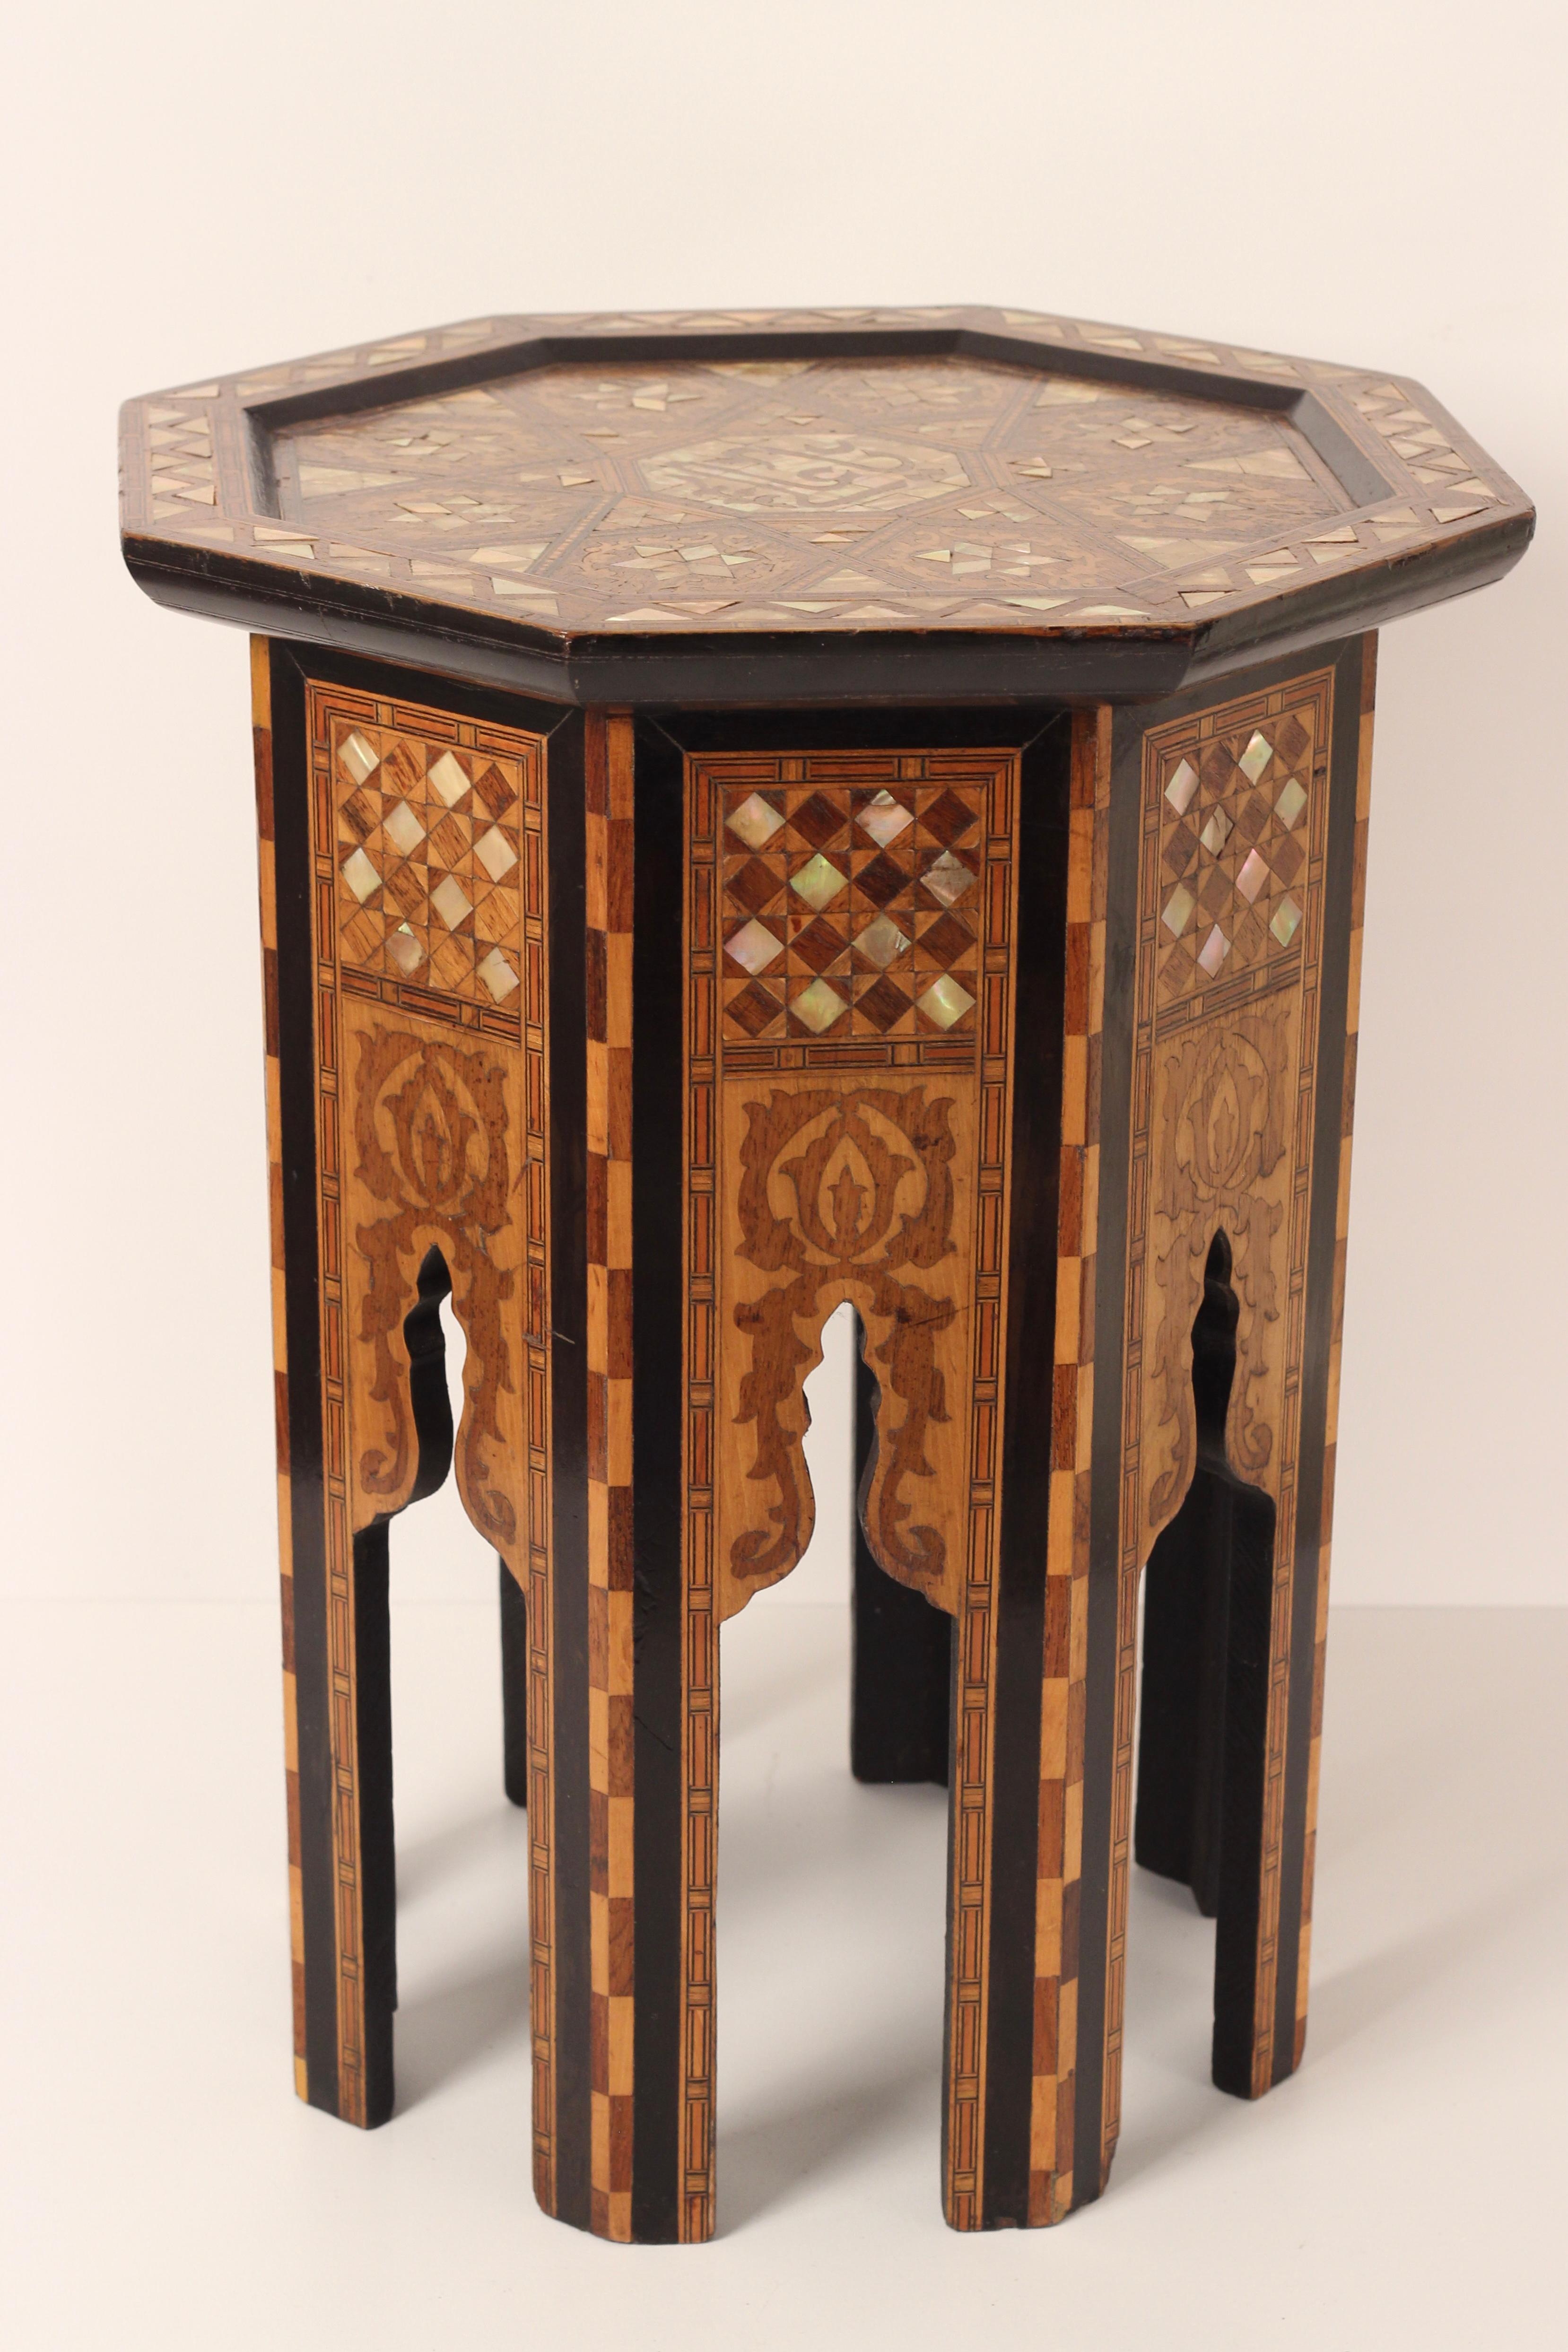 Bohemian Boho Chic style Octagonal Table,  Mother of Pearl Inlay Attr Liberty & Co.